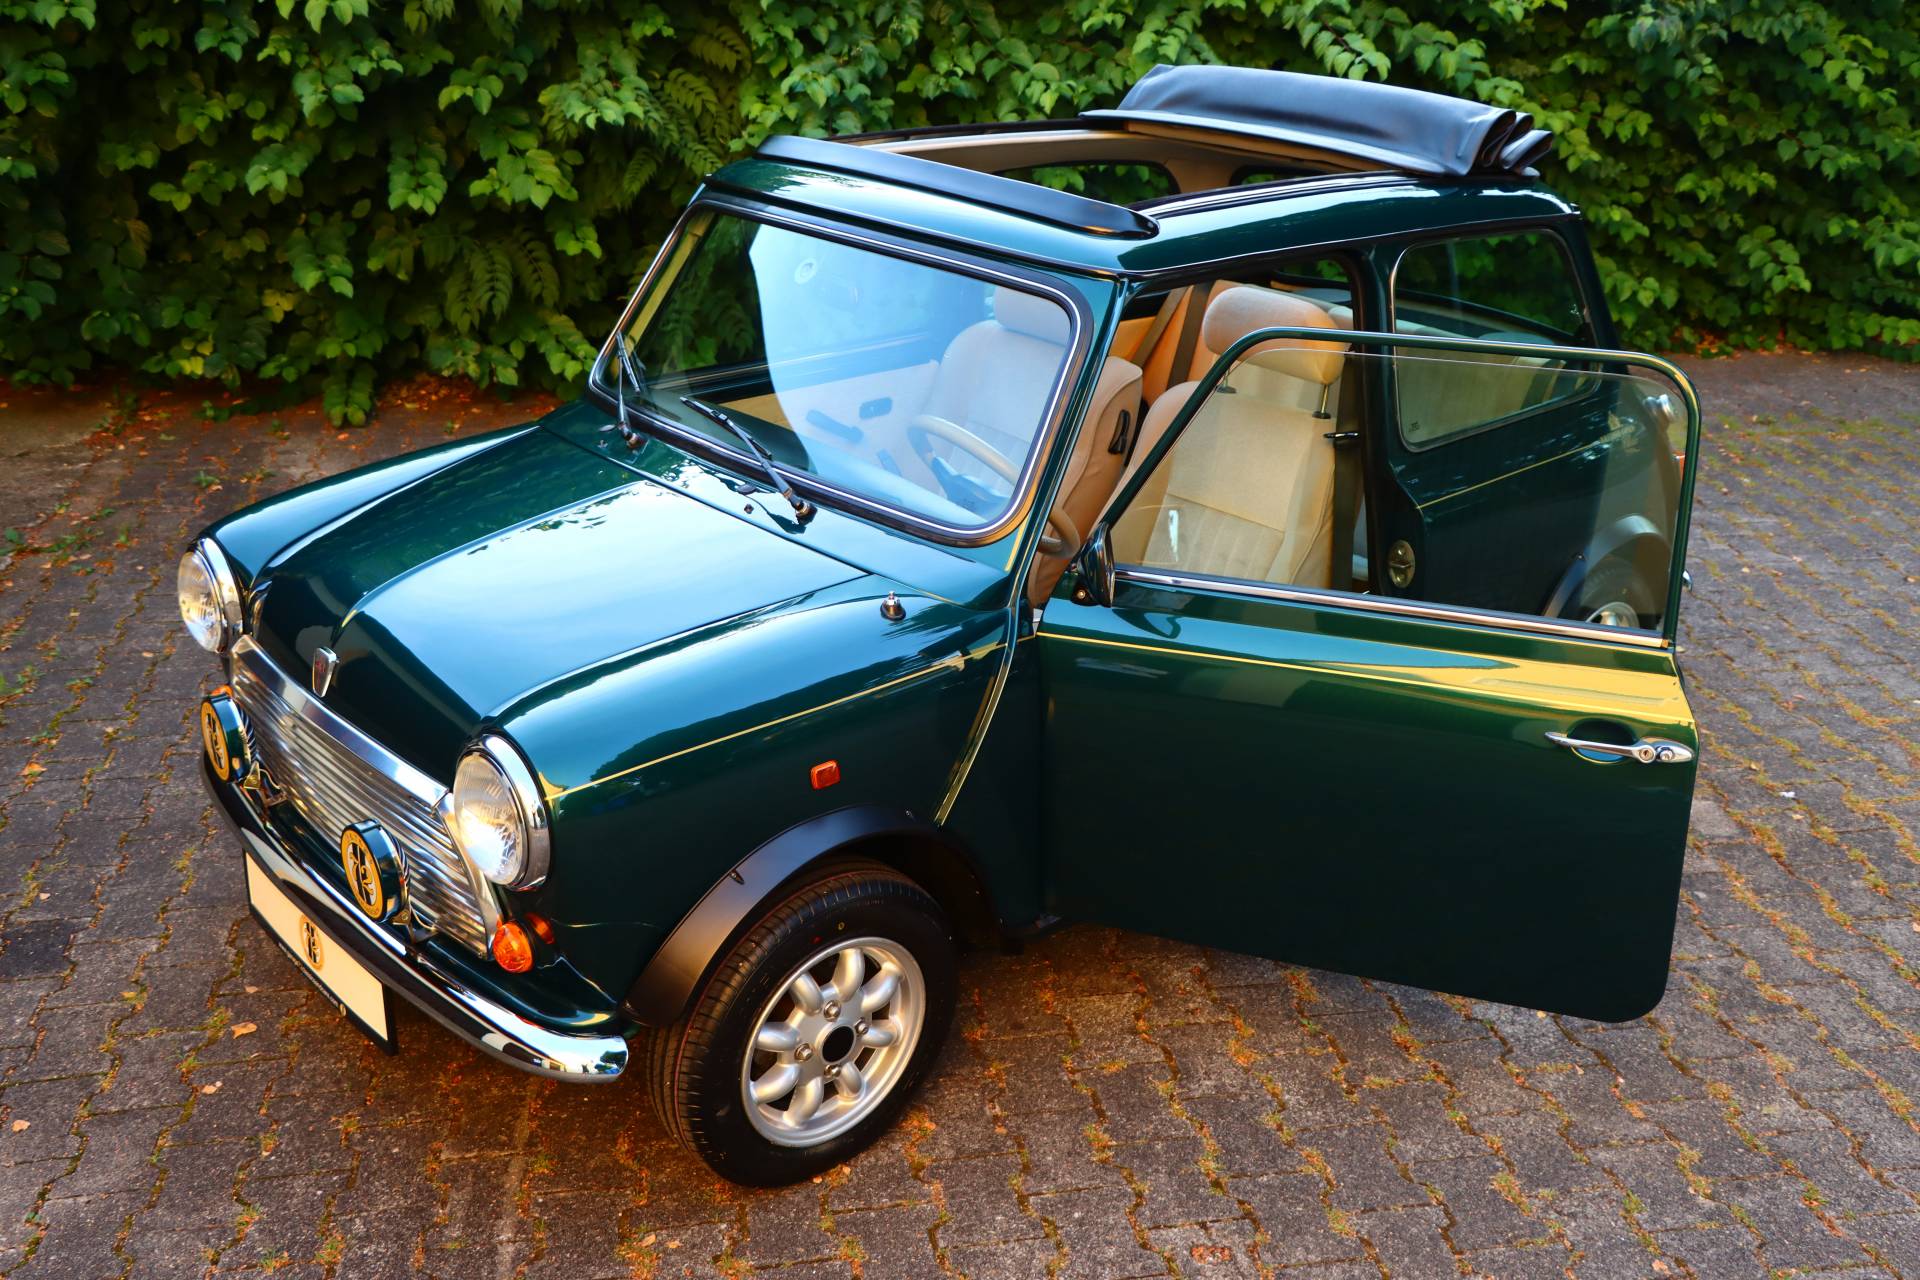 For Sale Rover Mini British Open Classic (1996) offered for AUD 25,517